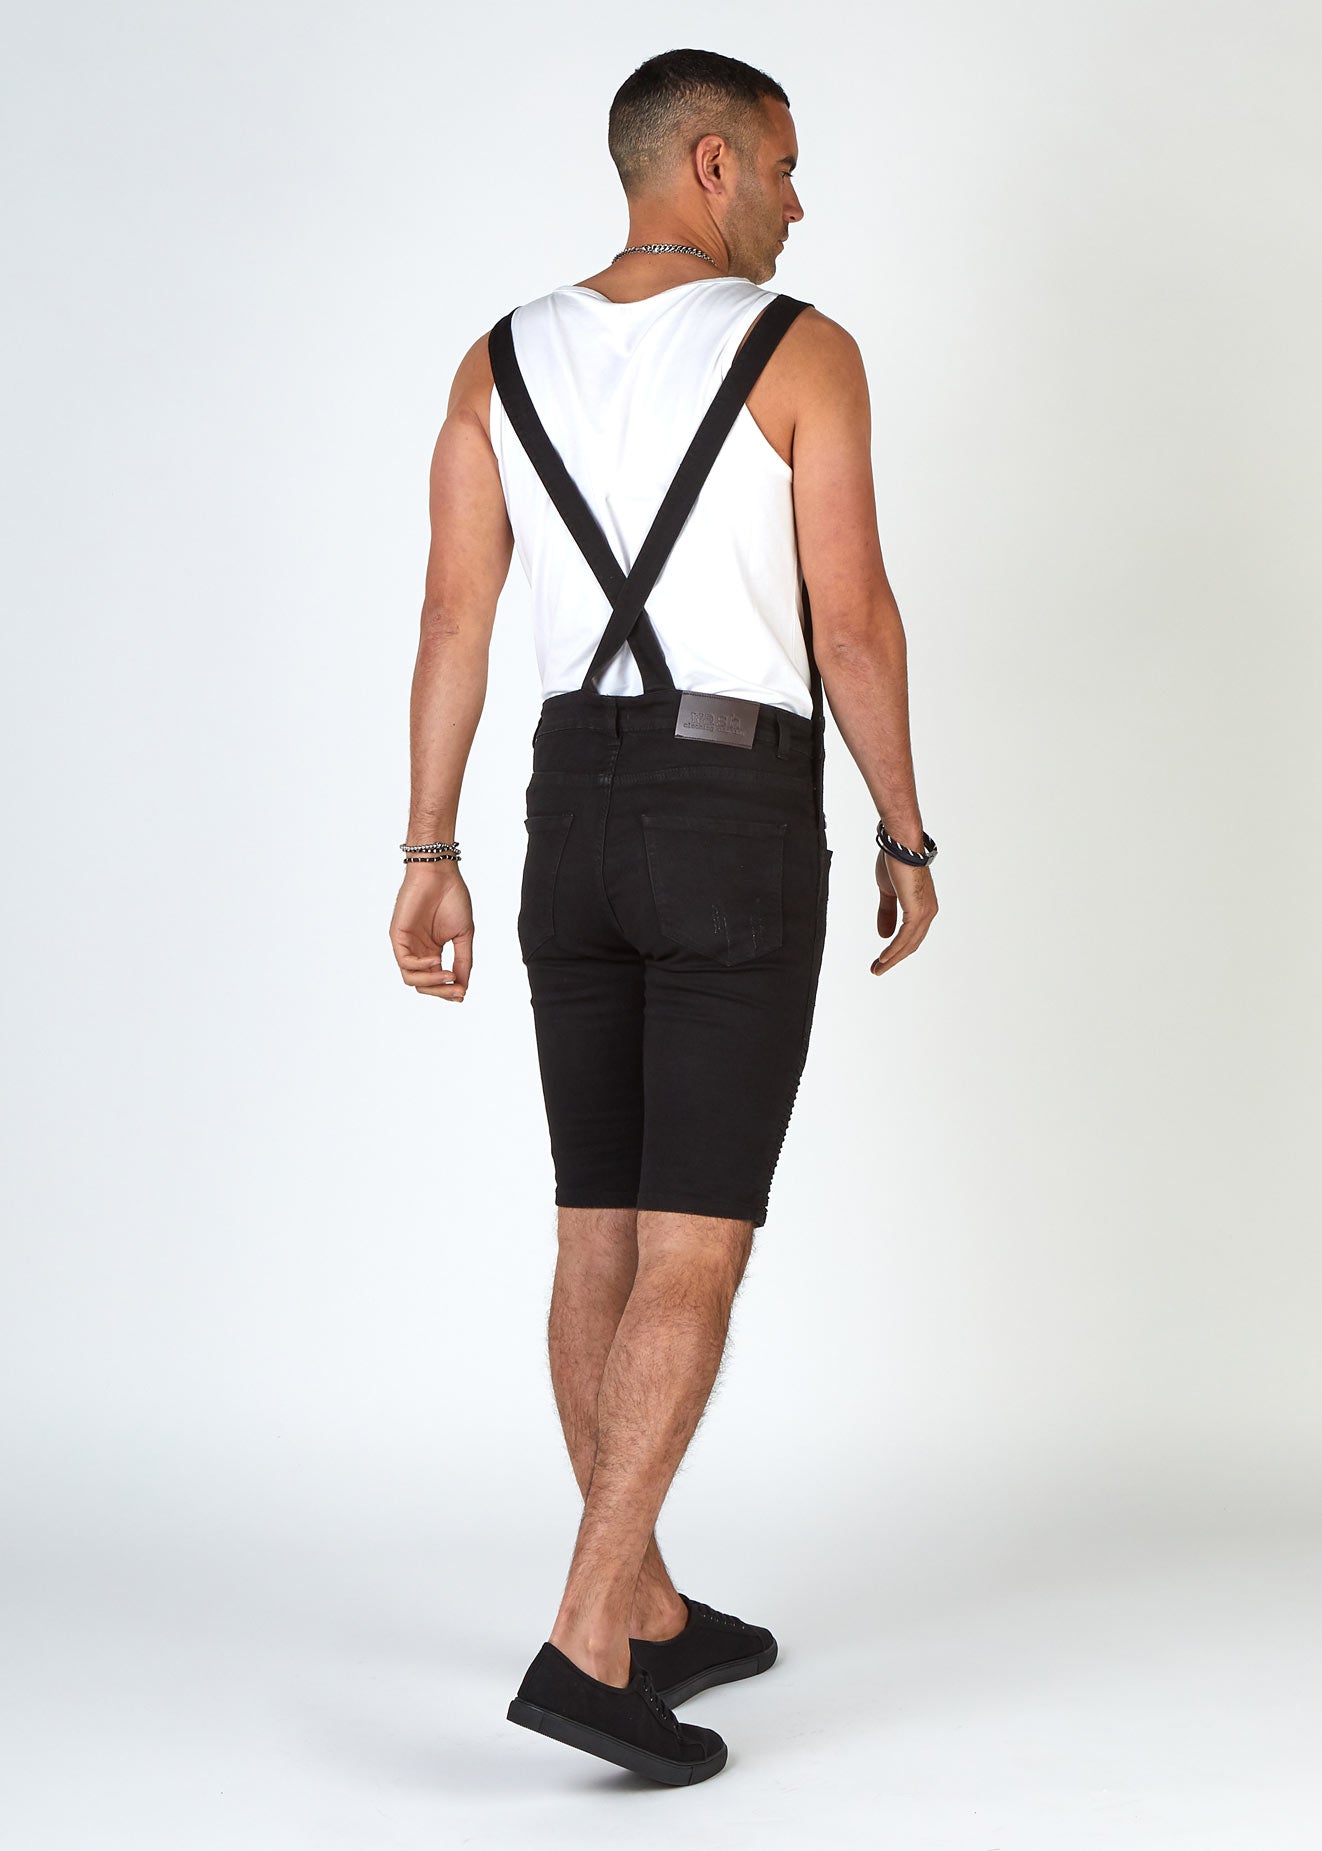 Rear pose to highlight slim overall straps that cross over at the back of Trafford biker dungaree shorts